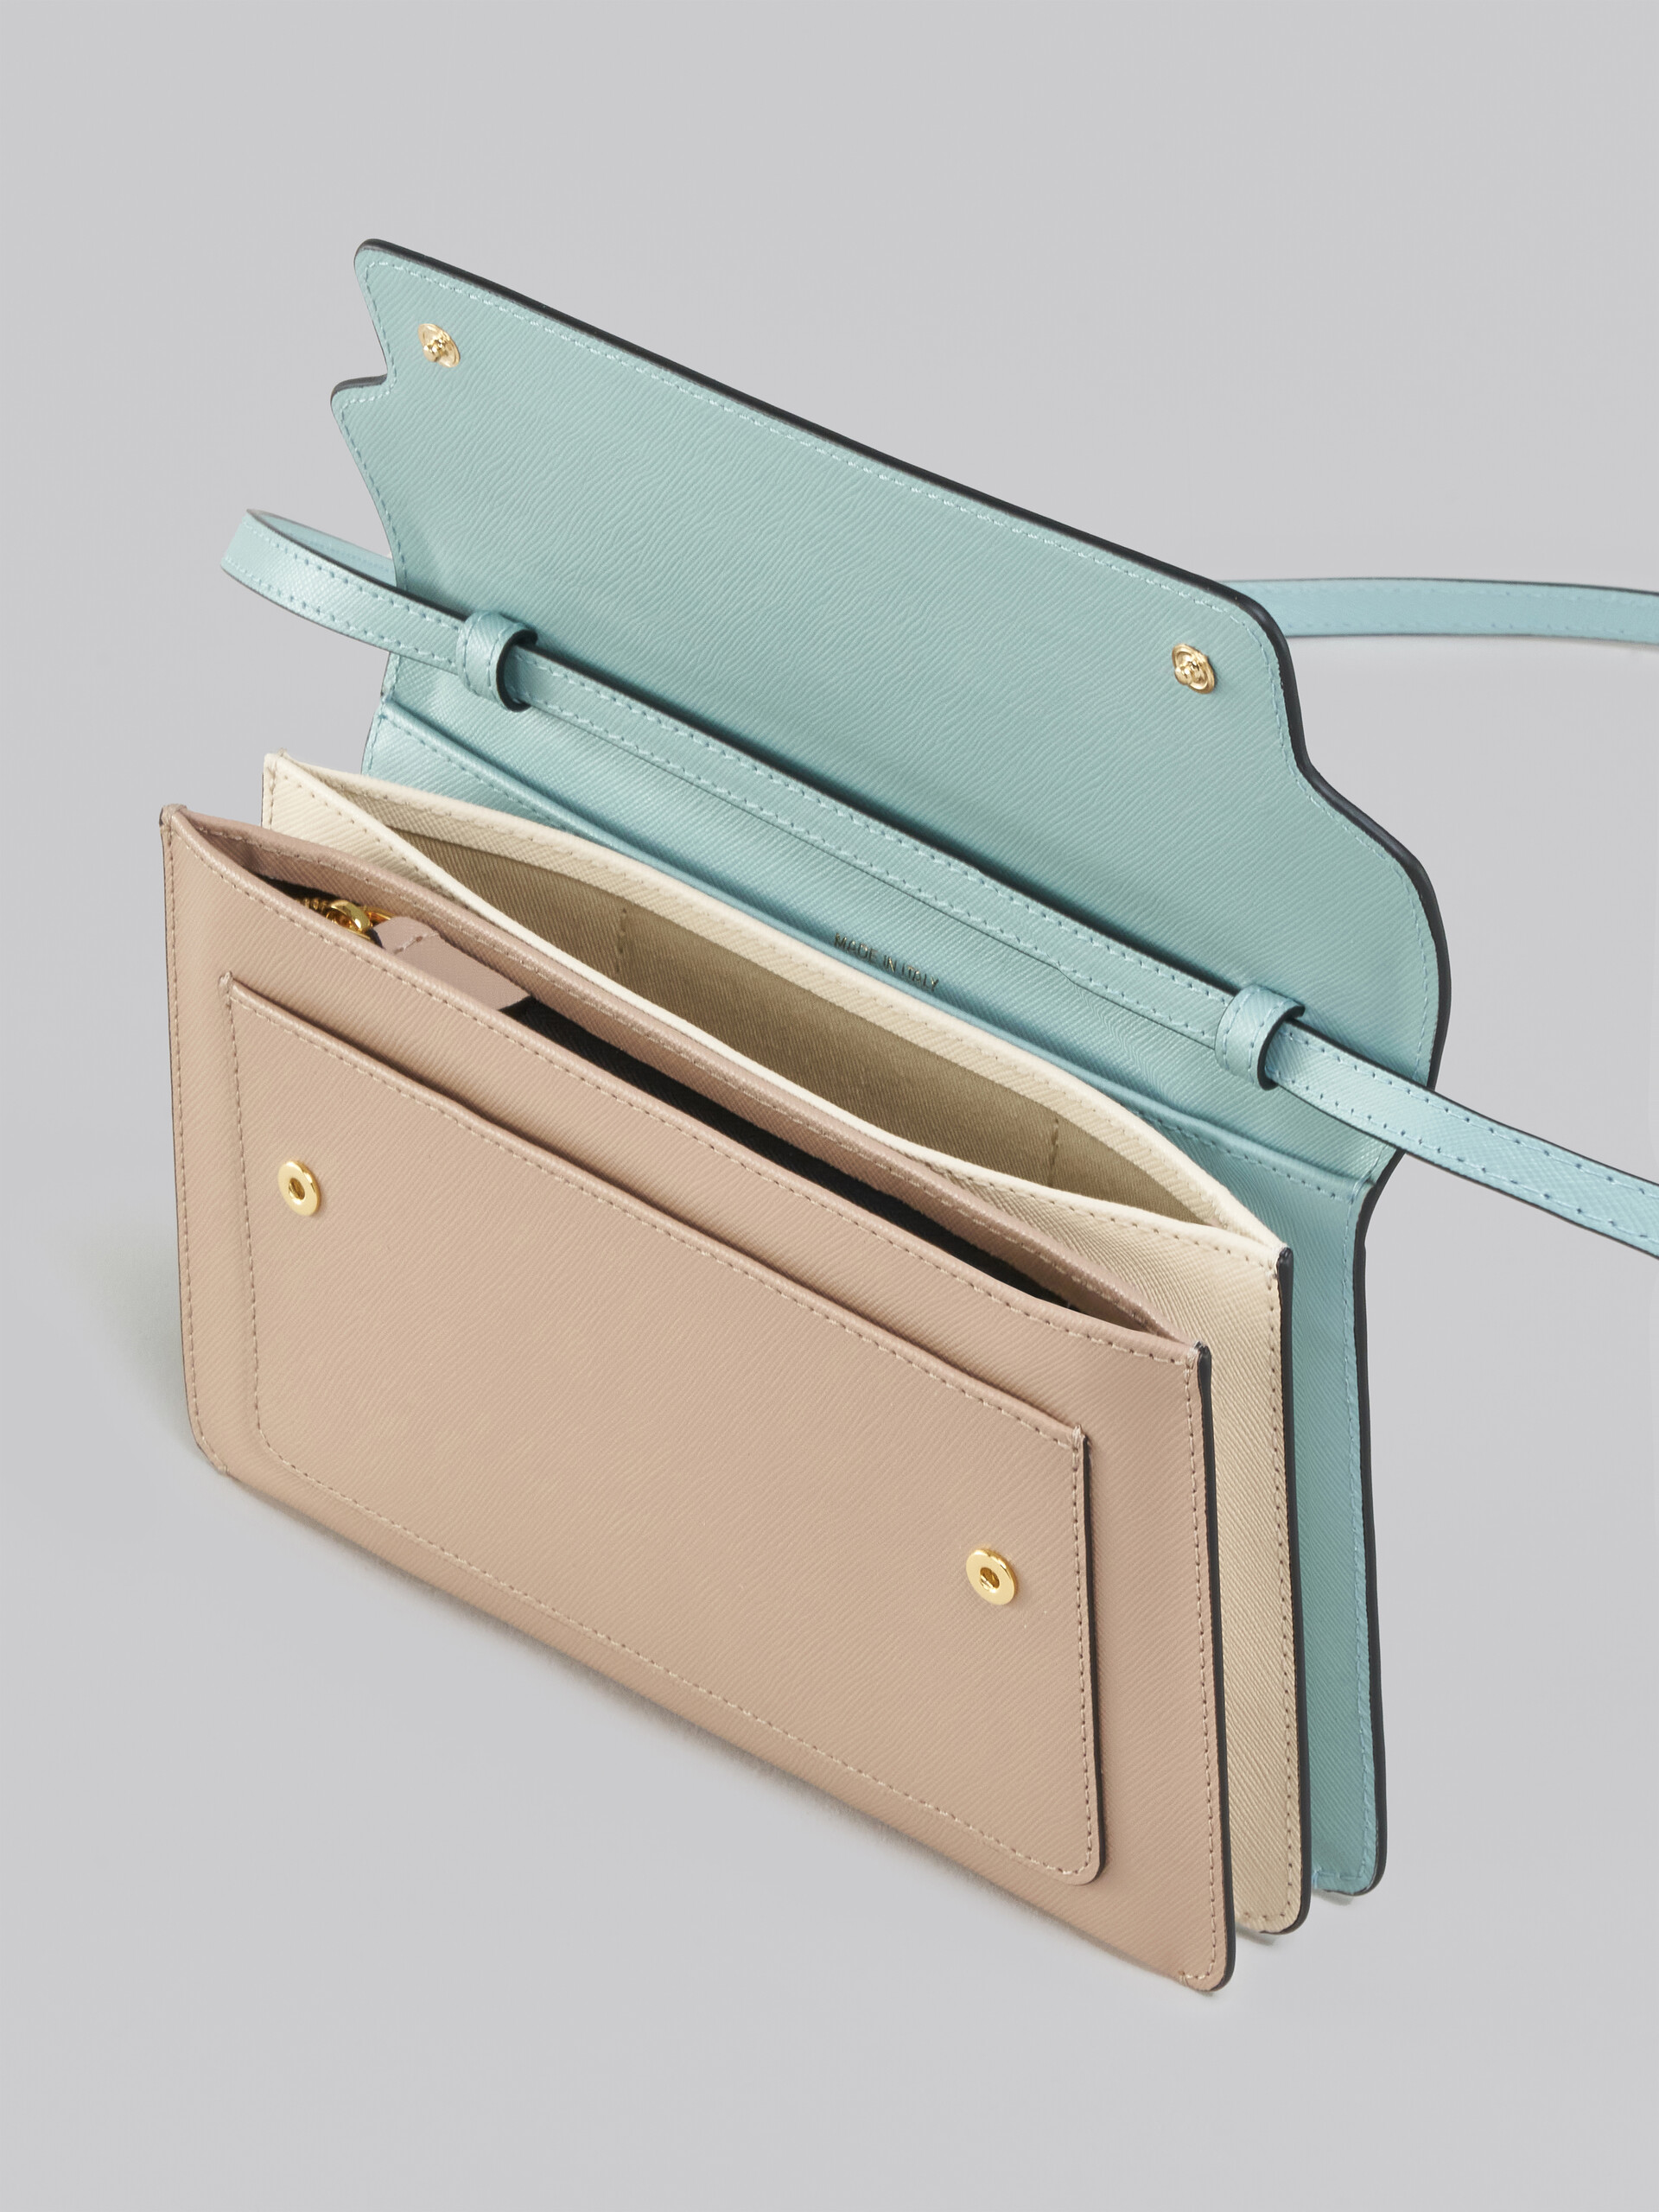 Trunk Clutch in light blue beige and white saffiano leather - Pochettes - Image 4